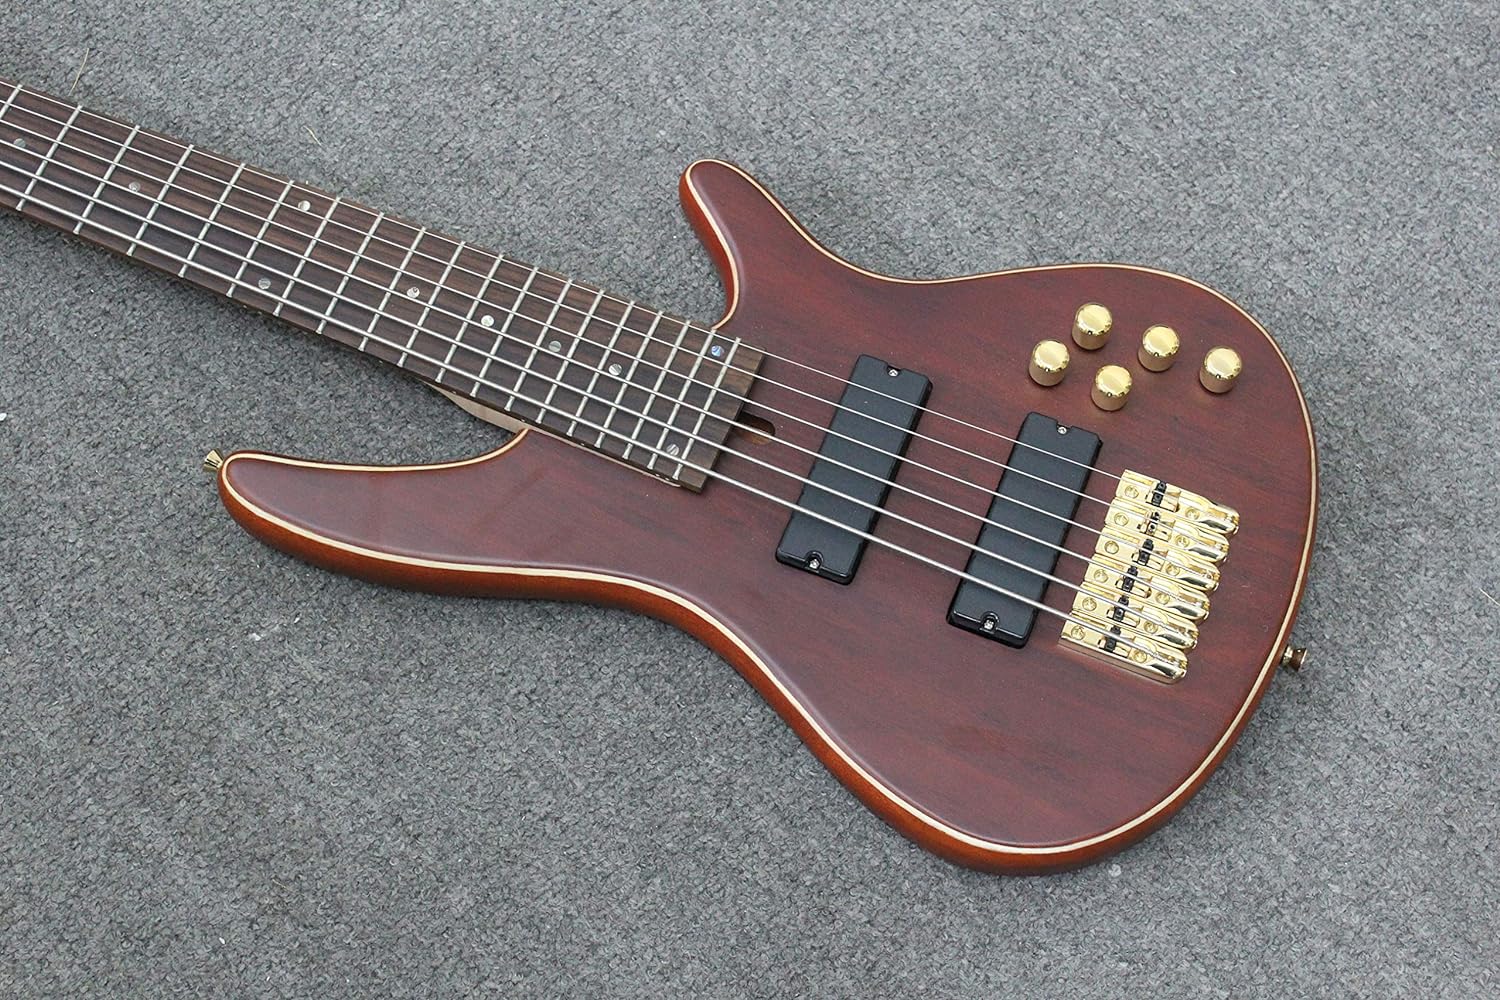 Batking brand 6 string electric bass with maple neck(EB01)